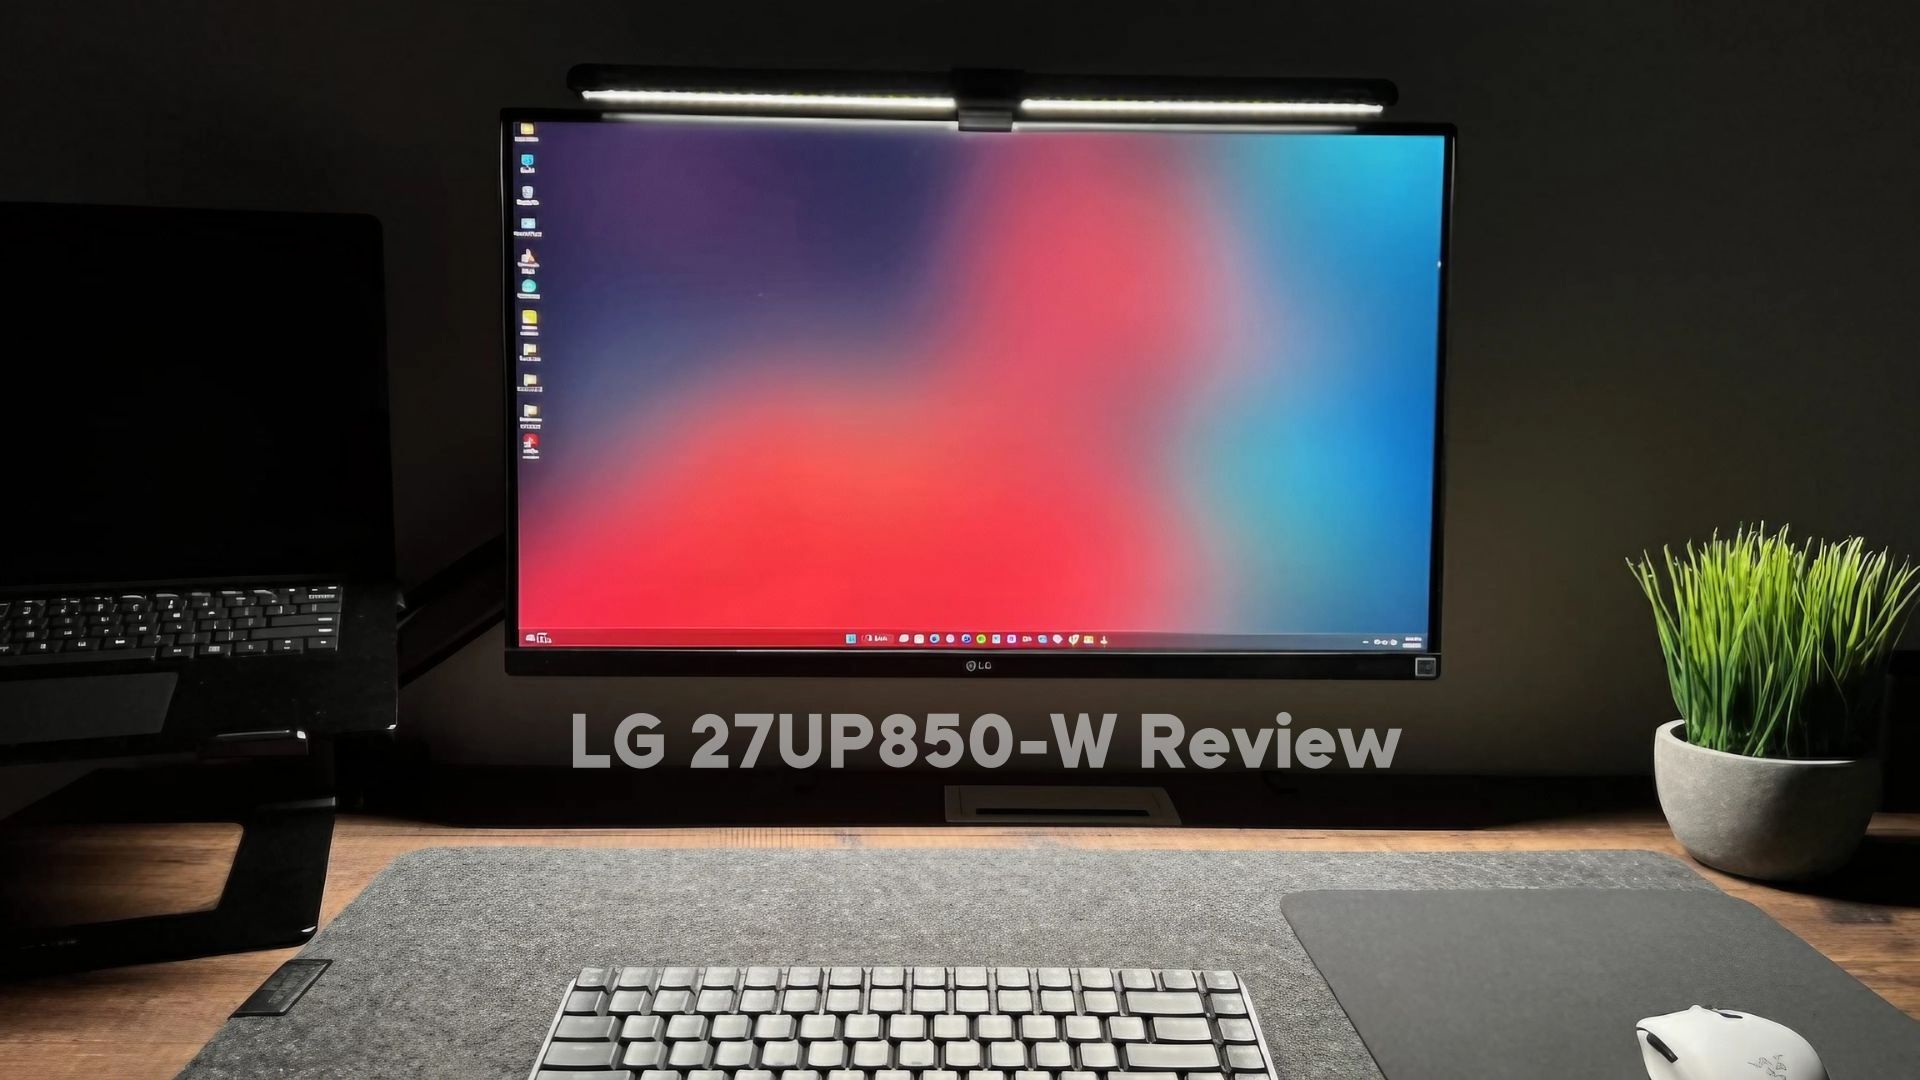 LG 27UP850-W Review